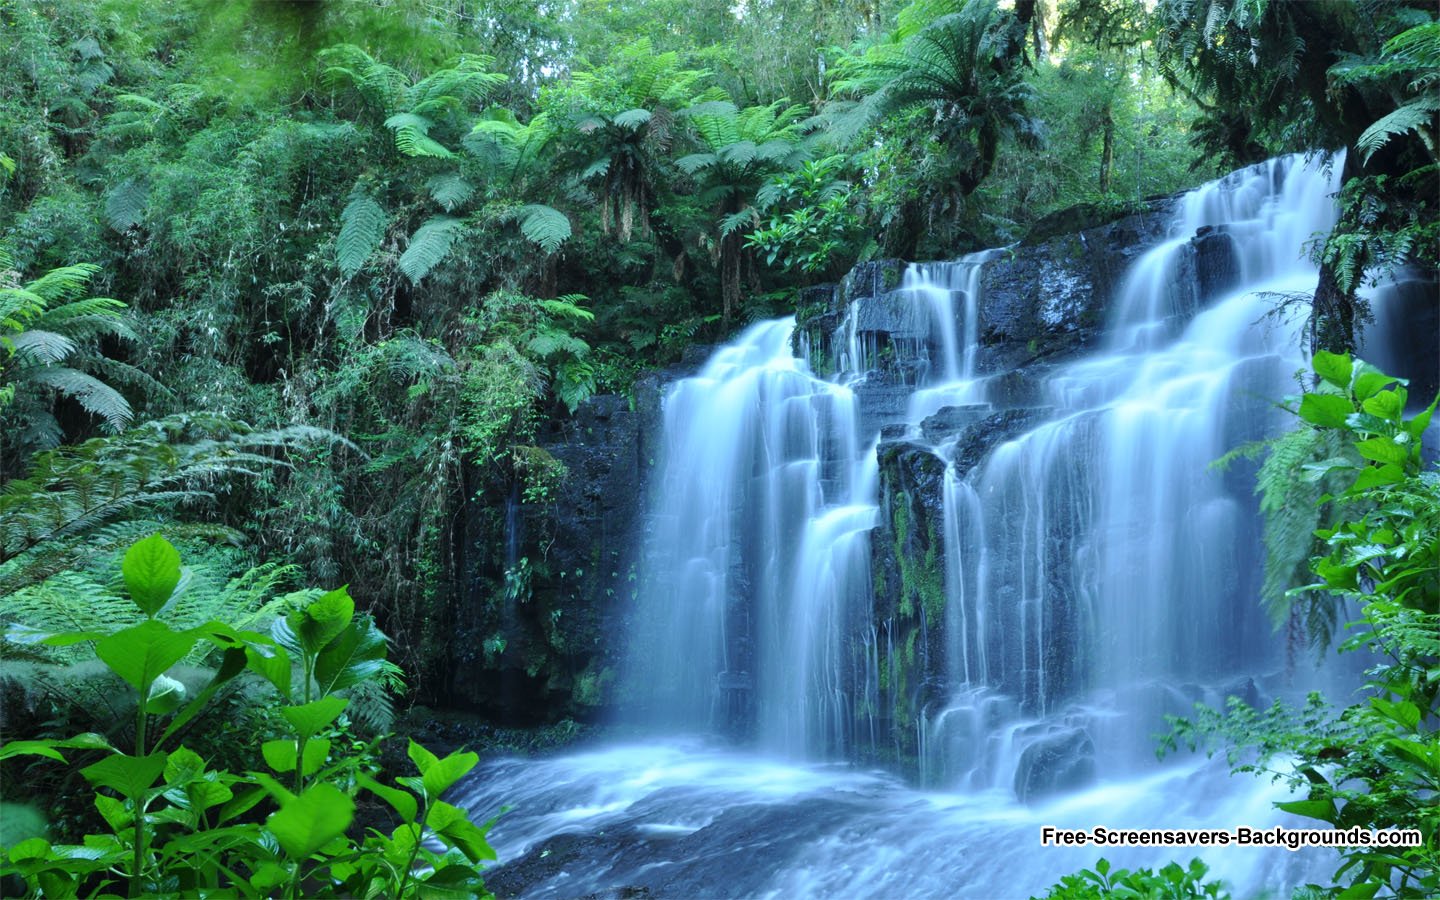  Waterfall Wallpapers Feb 2 2011   Screensavers and Backgrounds 1440x900